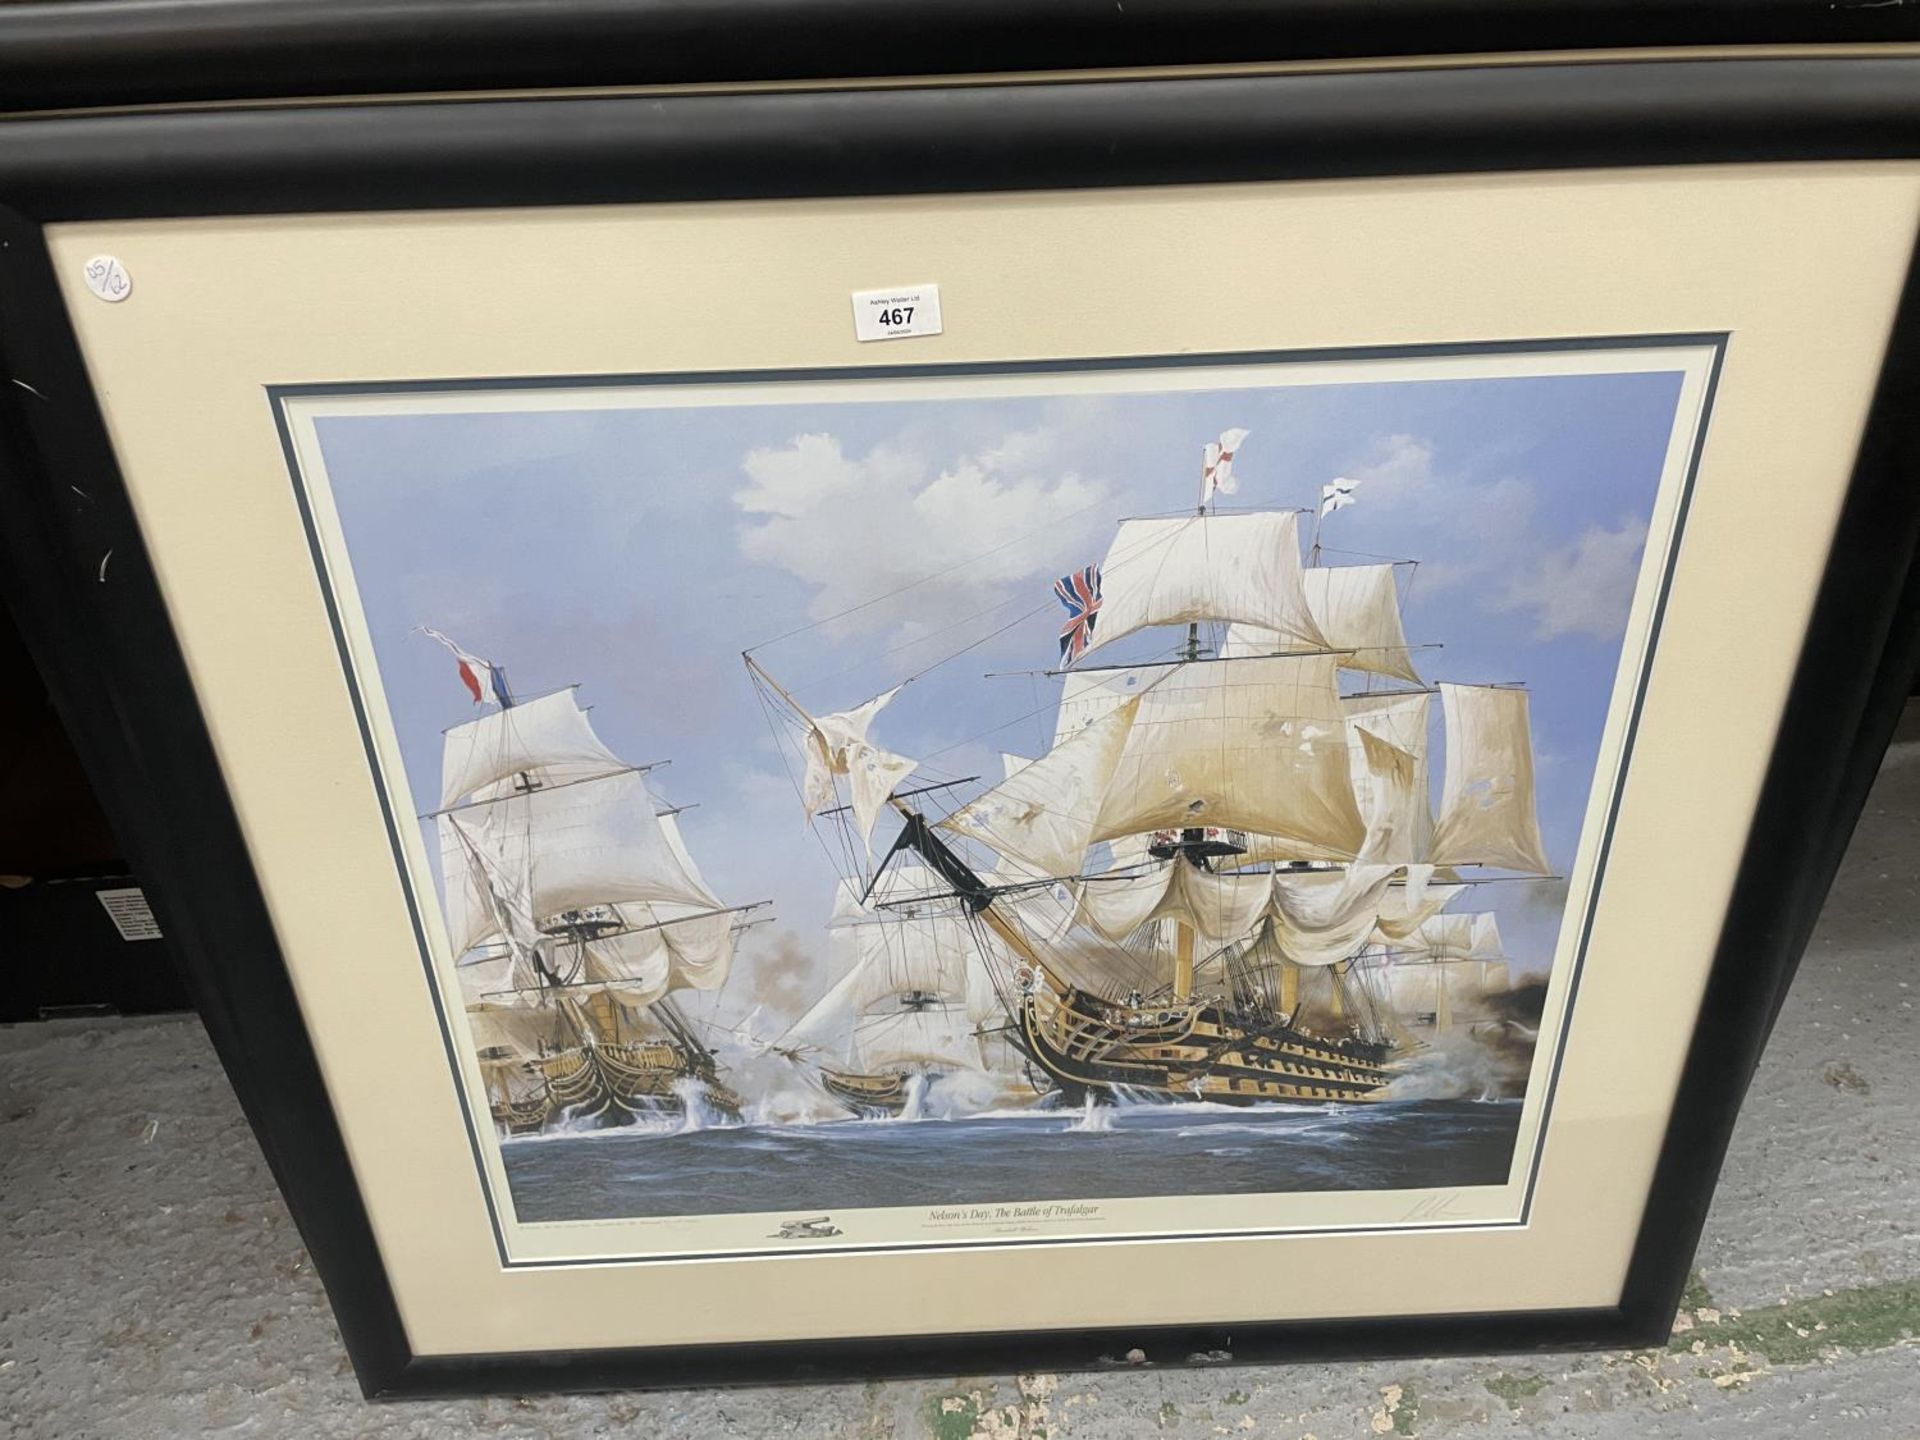 A FRAMED COLOUR SIGNED LIMITED EDITION 672/1150 PRINT OF 'NELSONS DAY, THE BATTLE OF TRAFALGAR' BY